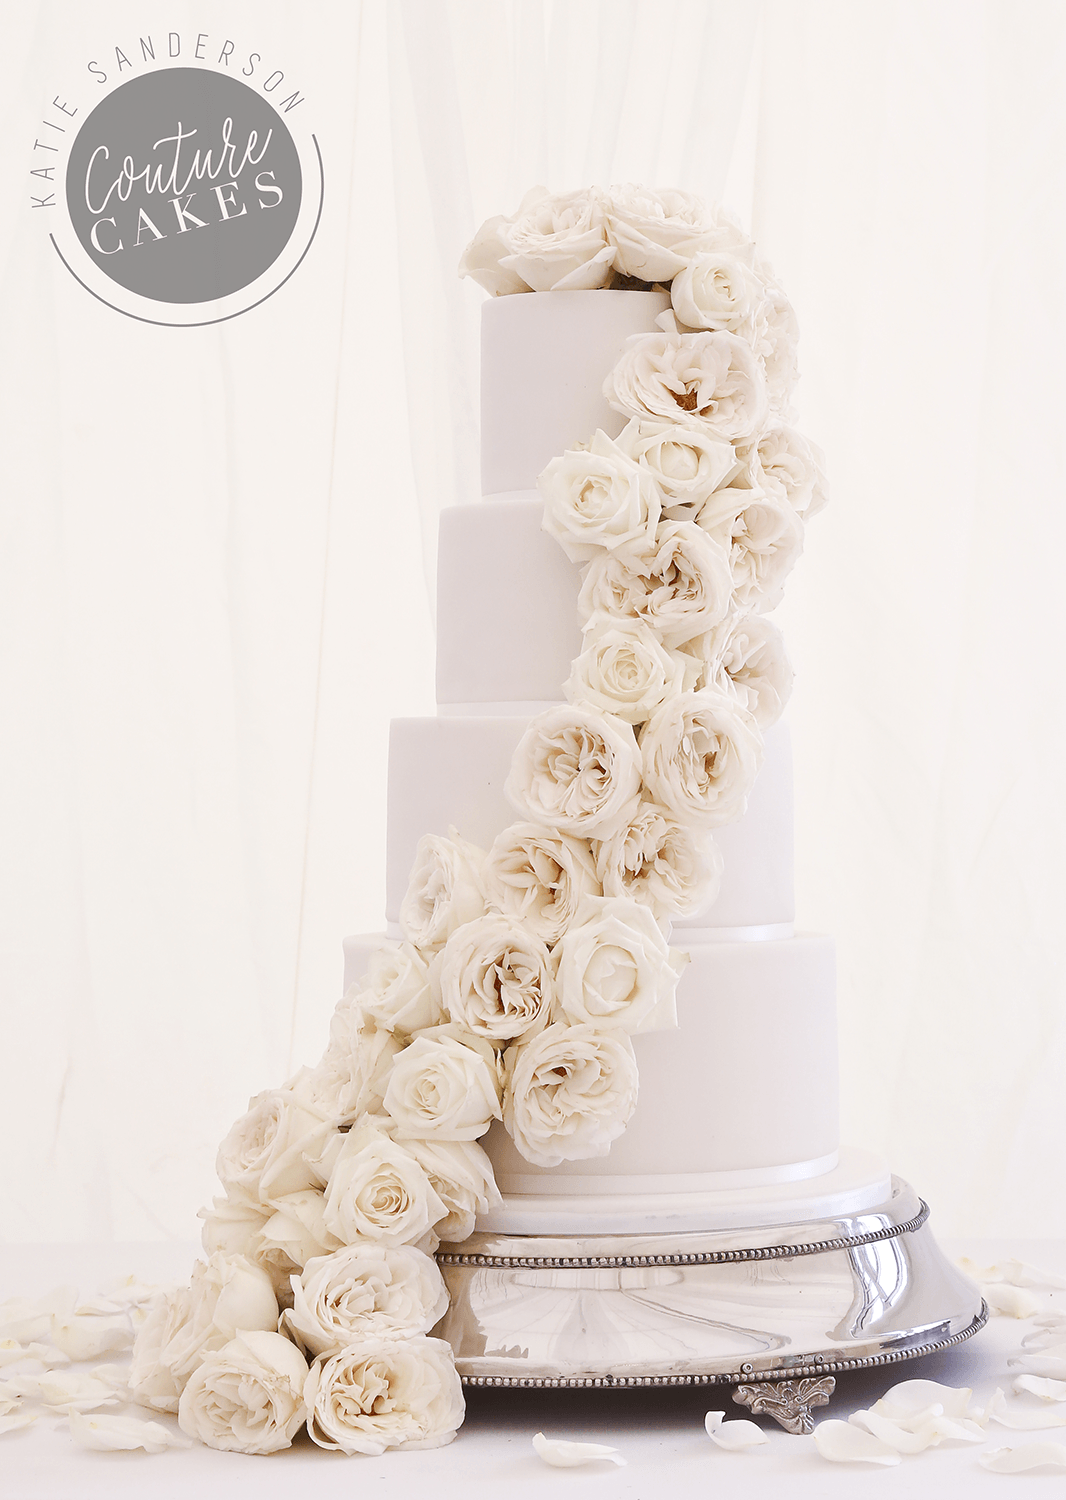 Ivory Cascading Roses Wedding Cake: Serves 170 portions, Price cat A, £545, plus £150 flowers